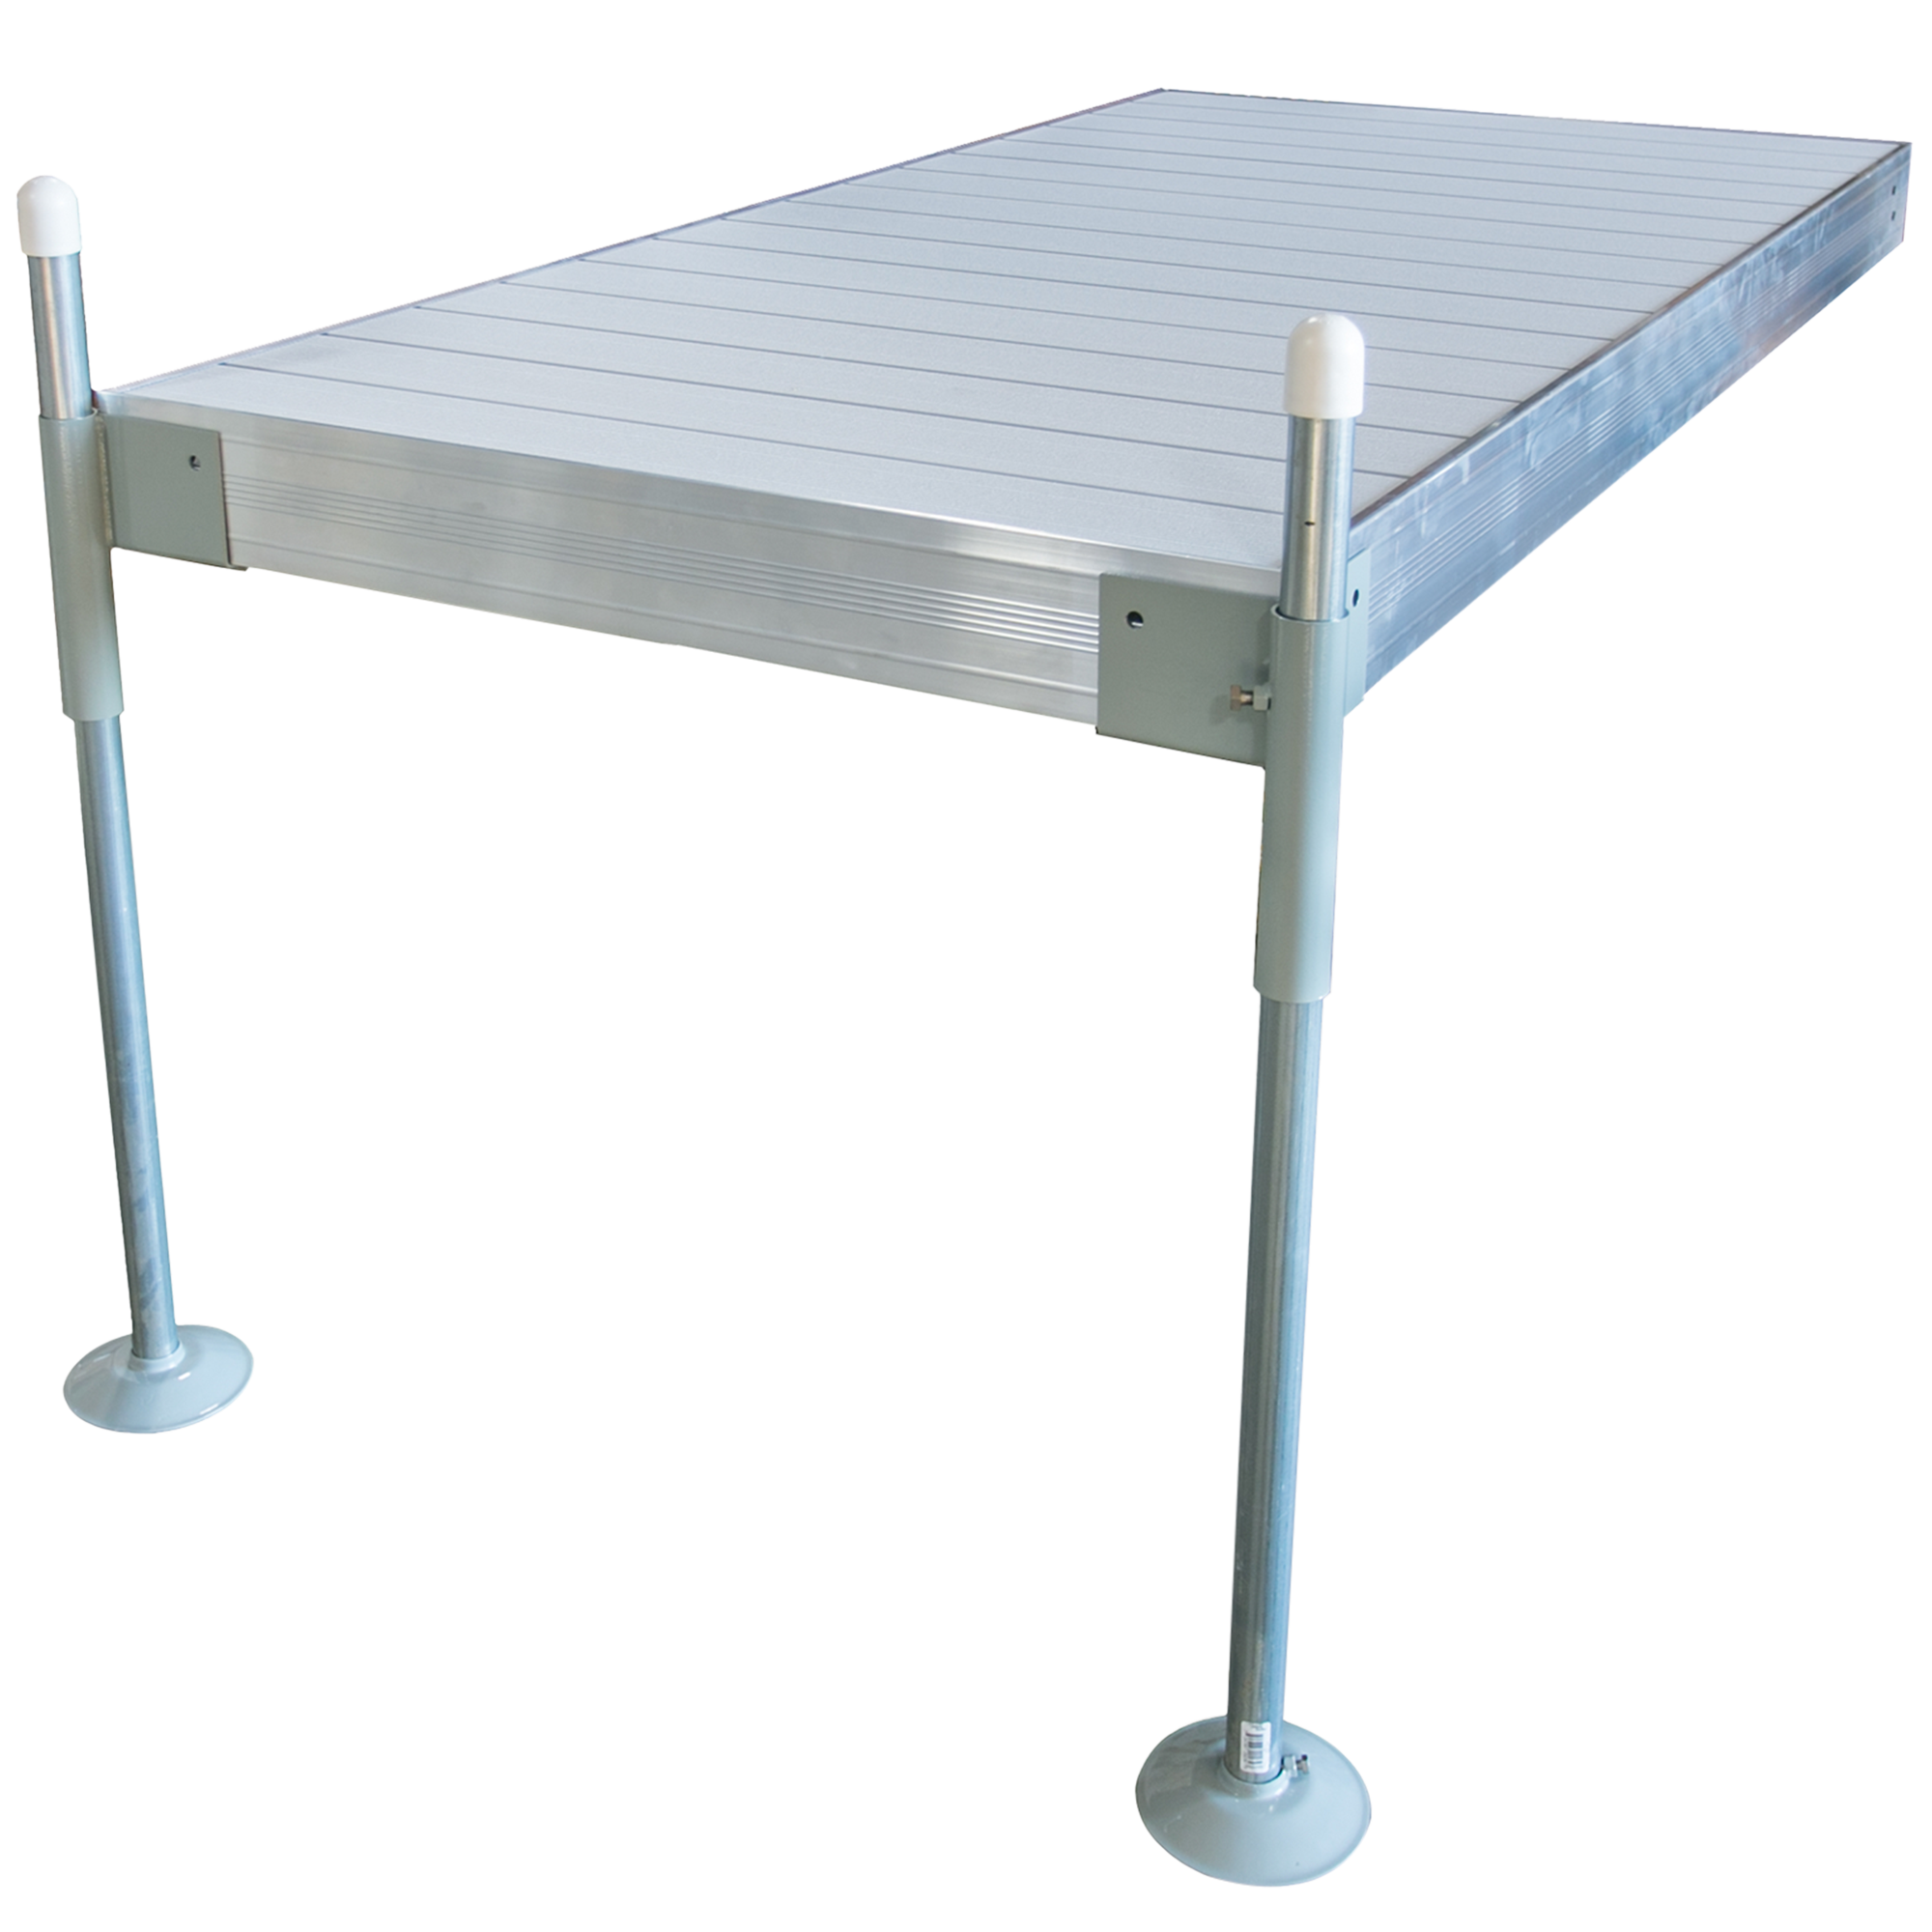 8’ Straight Boat Dock System with Aluminum Frame and Aluminum Decking